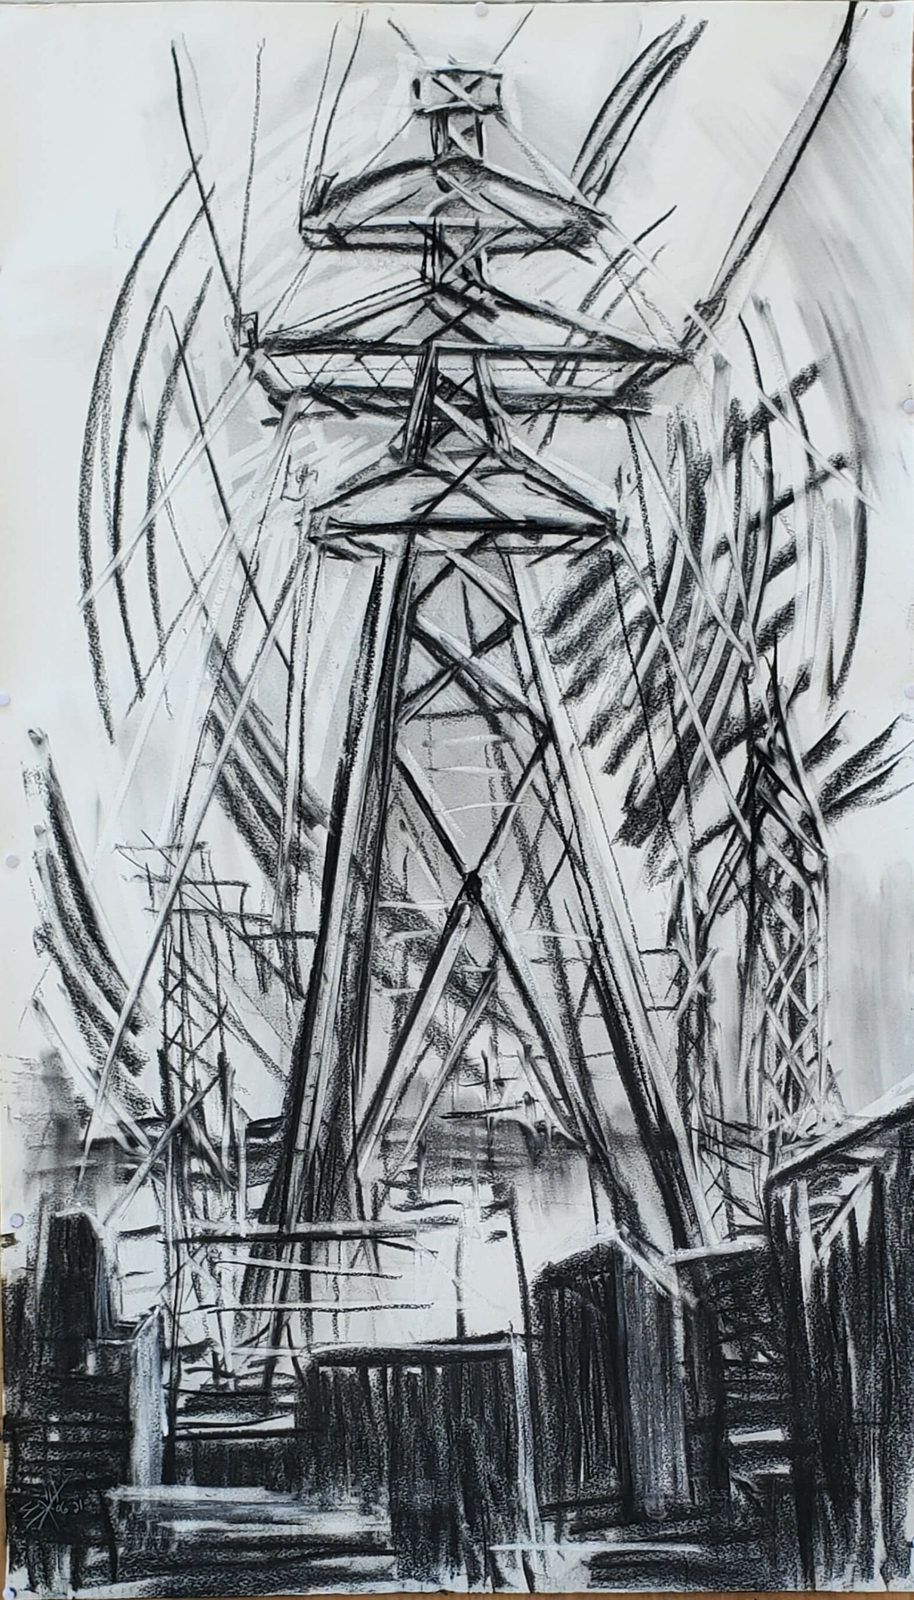 Charcoal and pastel drawing of an Ontario hydro Tower